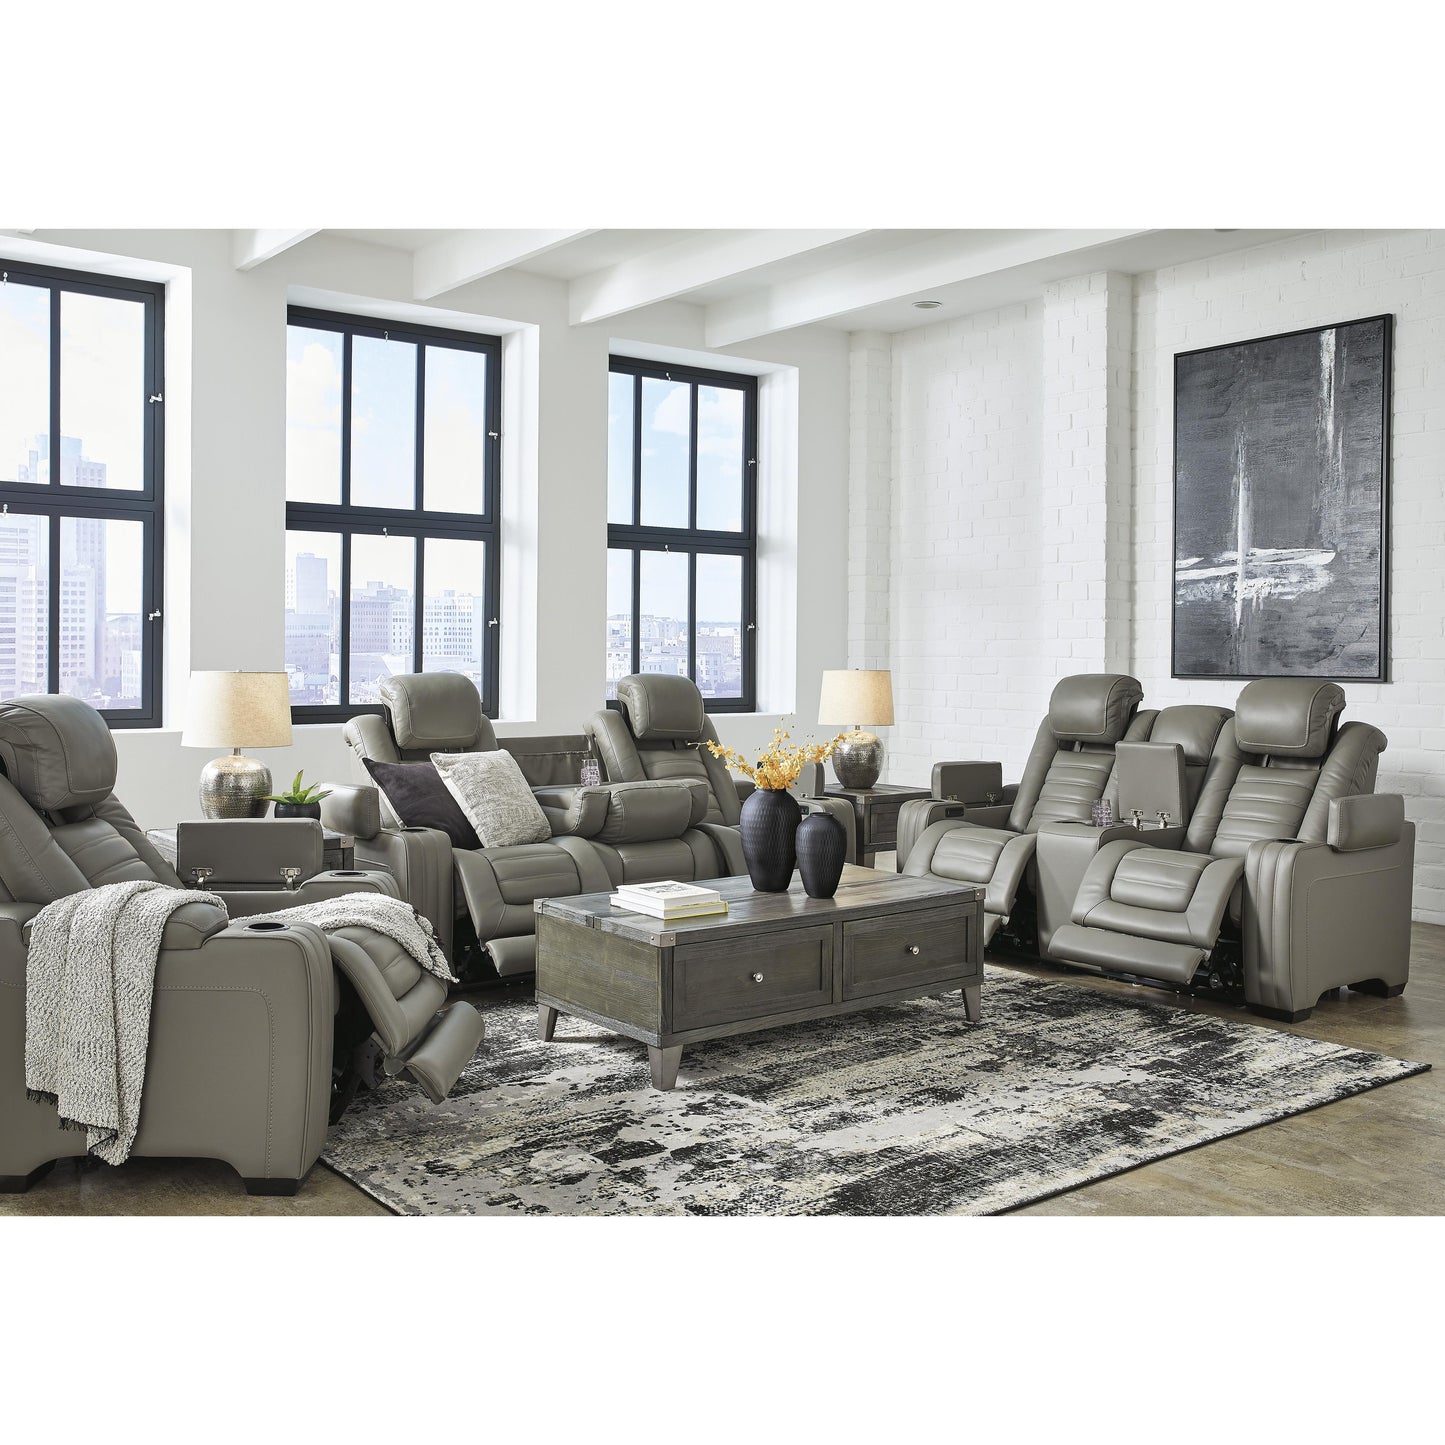 Signature Design by Ashley Backtrack Power Reclining Leather Match Loveseat U2800518 IMAGE 14